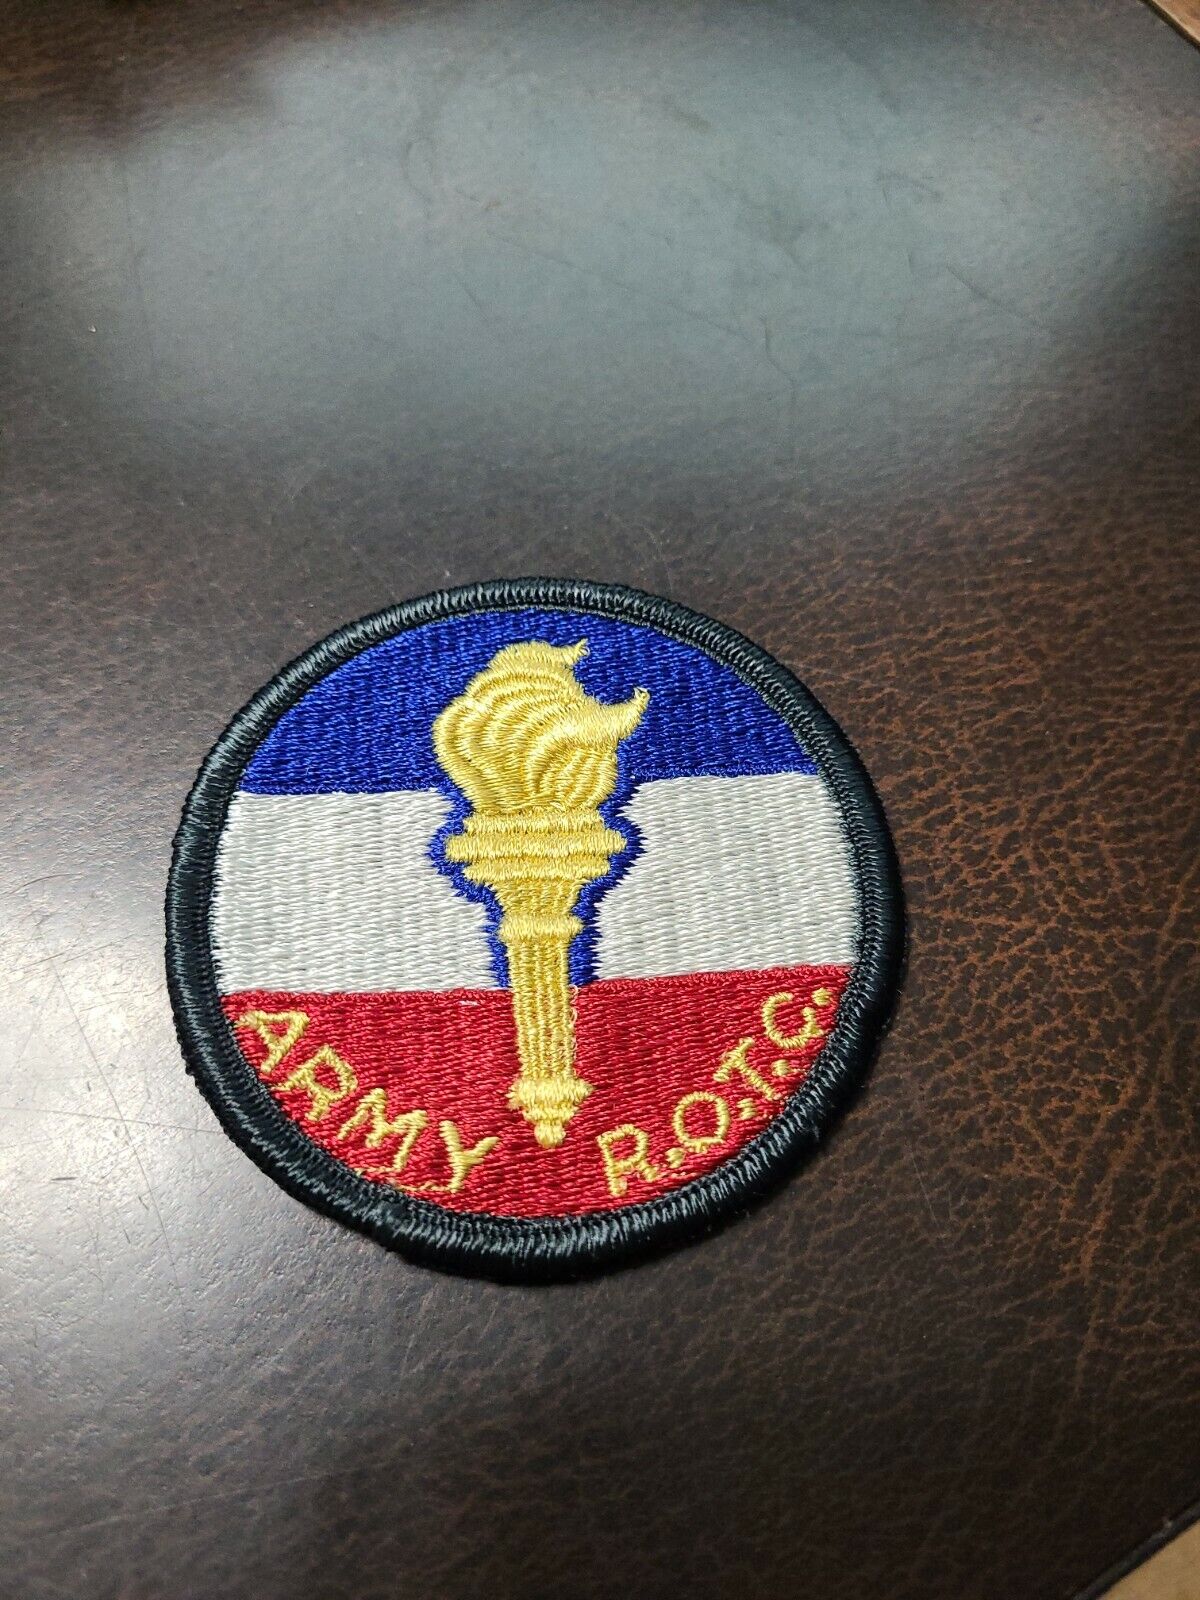 Vintage College University Army ROTC Patch 